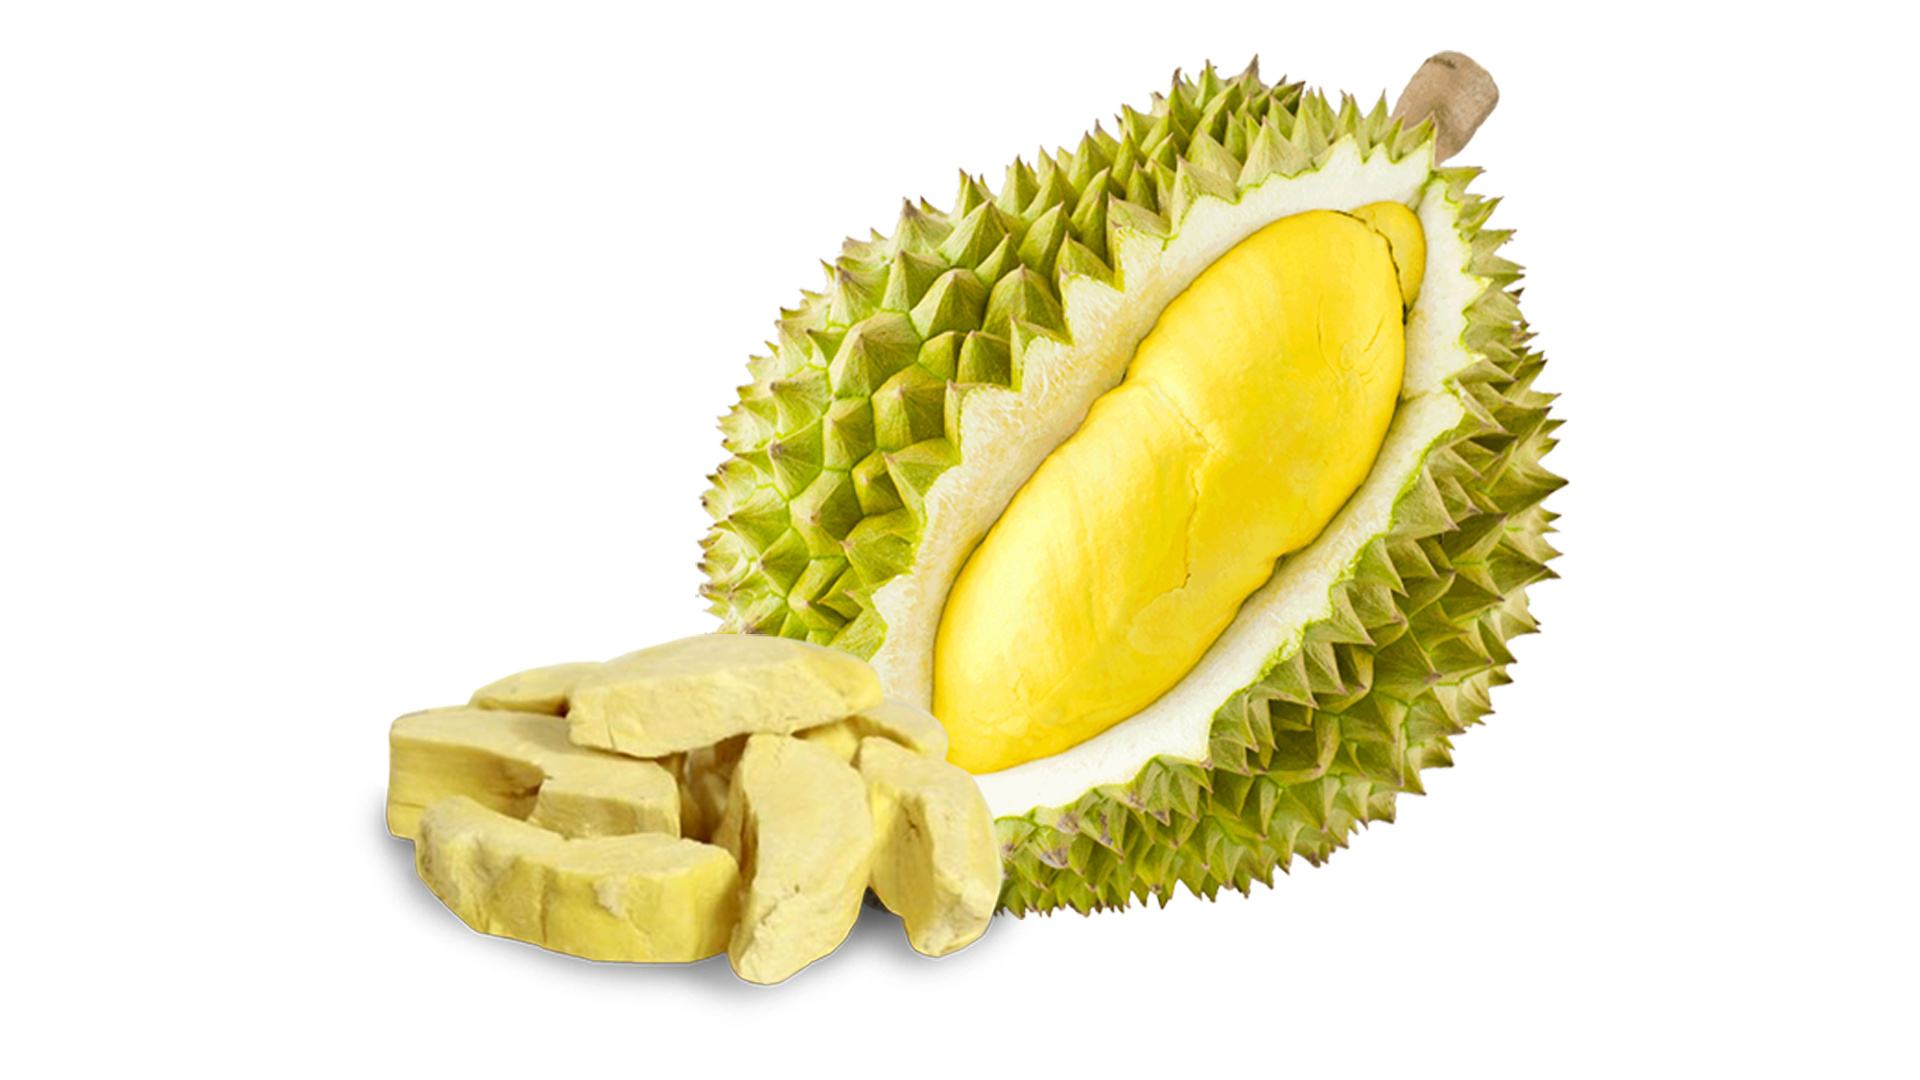 Durian: An iconic and culturally significant fruit in Southeast Asia. 1920x1080 Full HD Wallpaper.